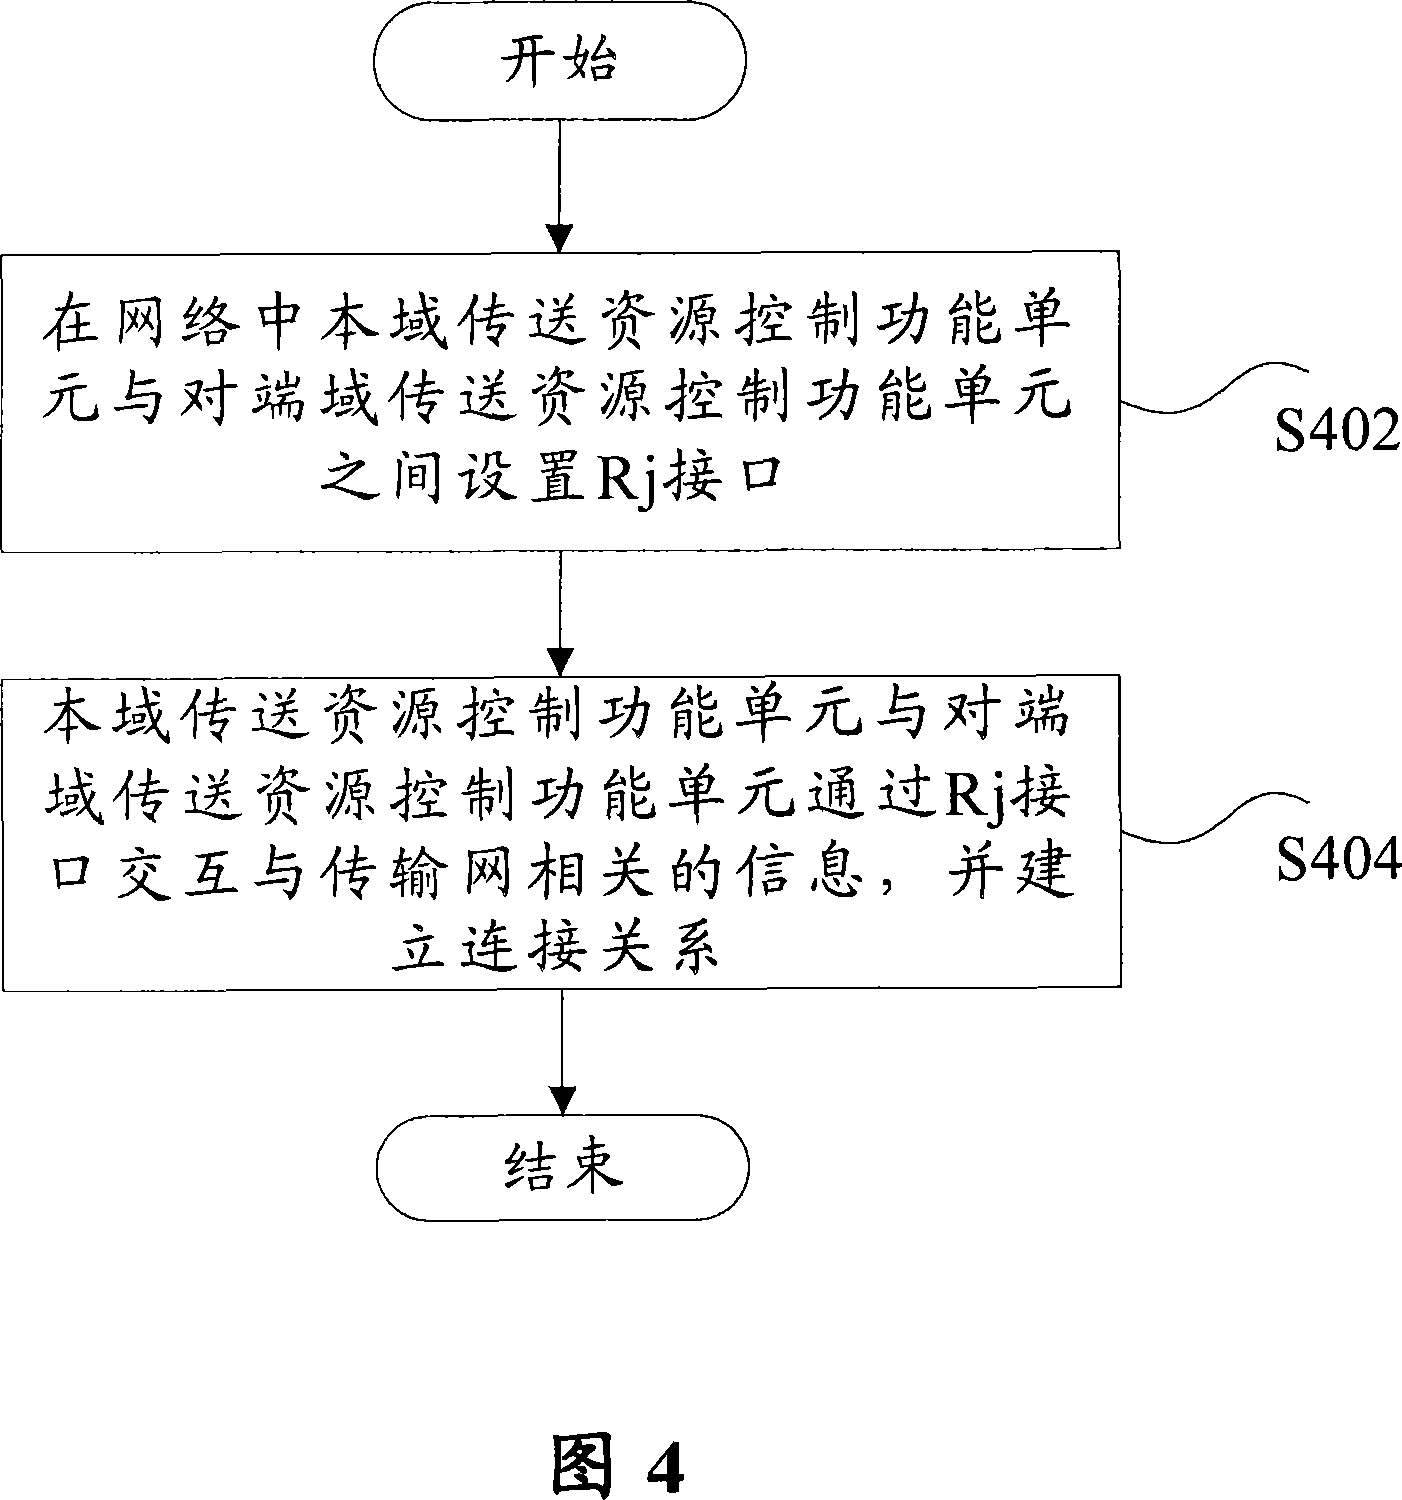 Method for cross-domain communication between resource control function units